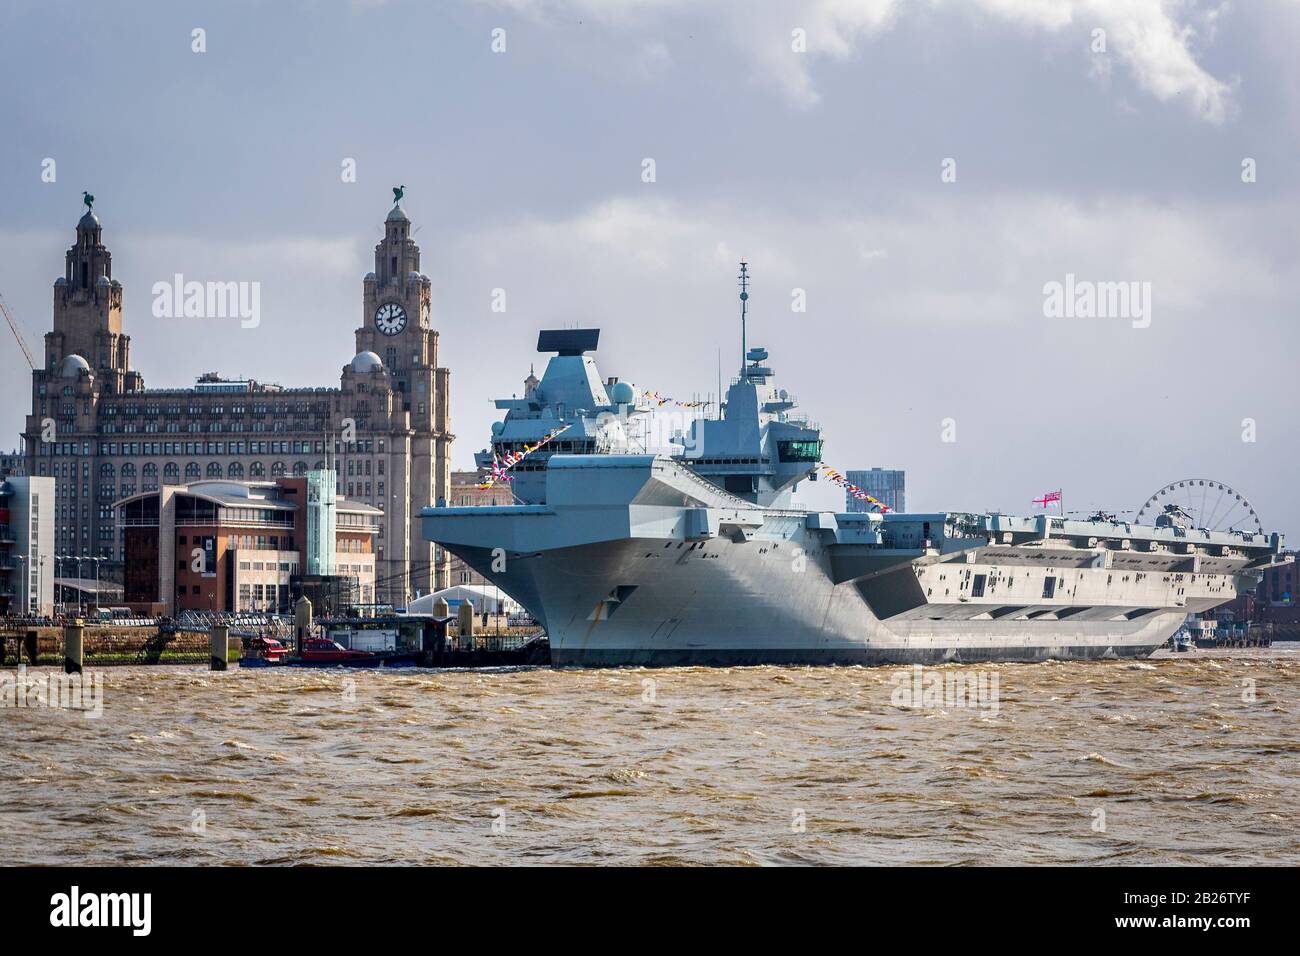 The Royal Navy's latest aircraft carrier HMS Prince of Wales berthed at Liverpool pierhead on a courtesy visit. Stock Photo